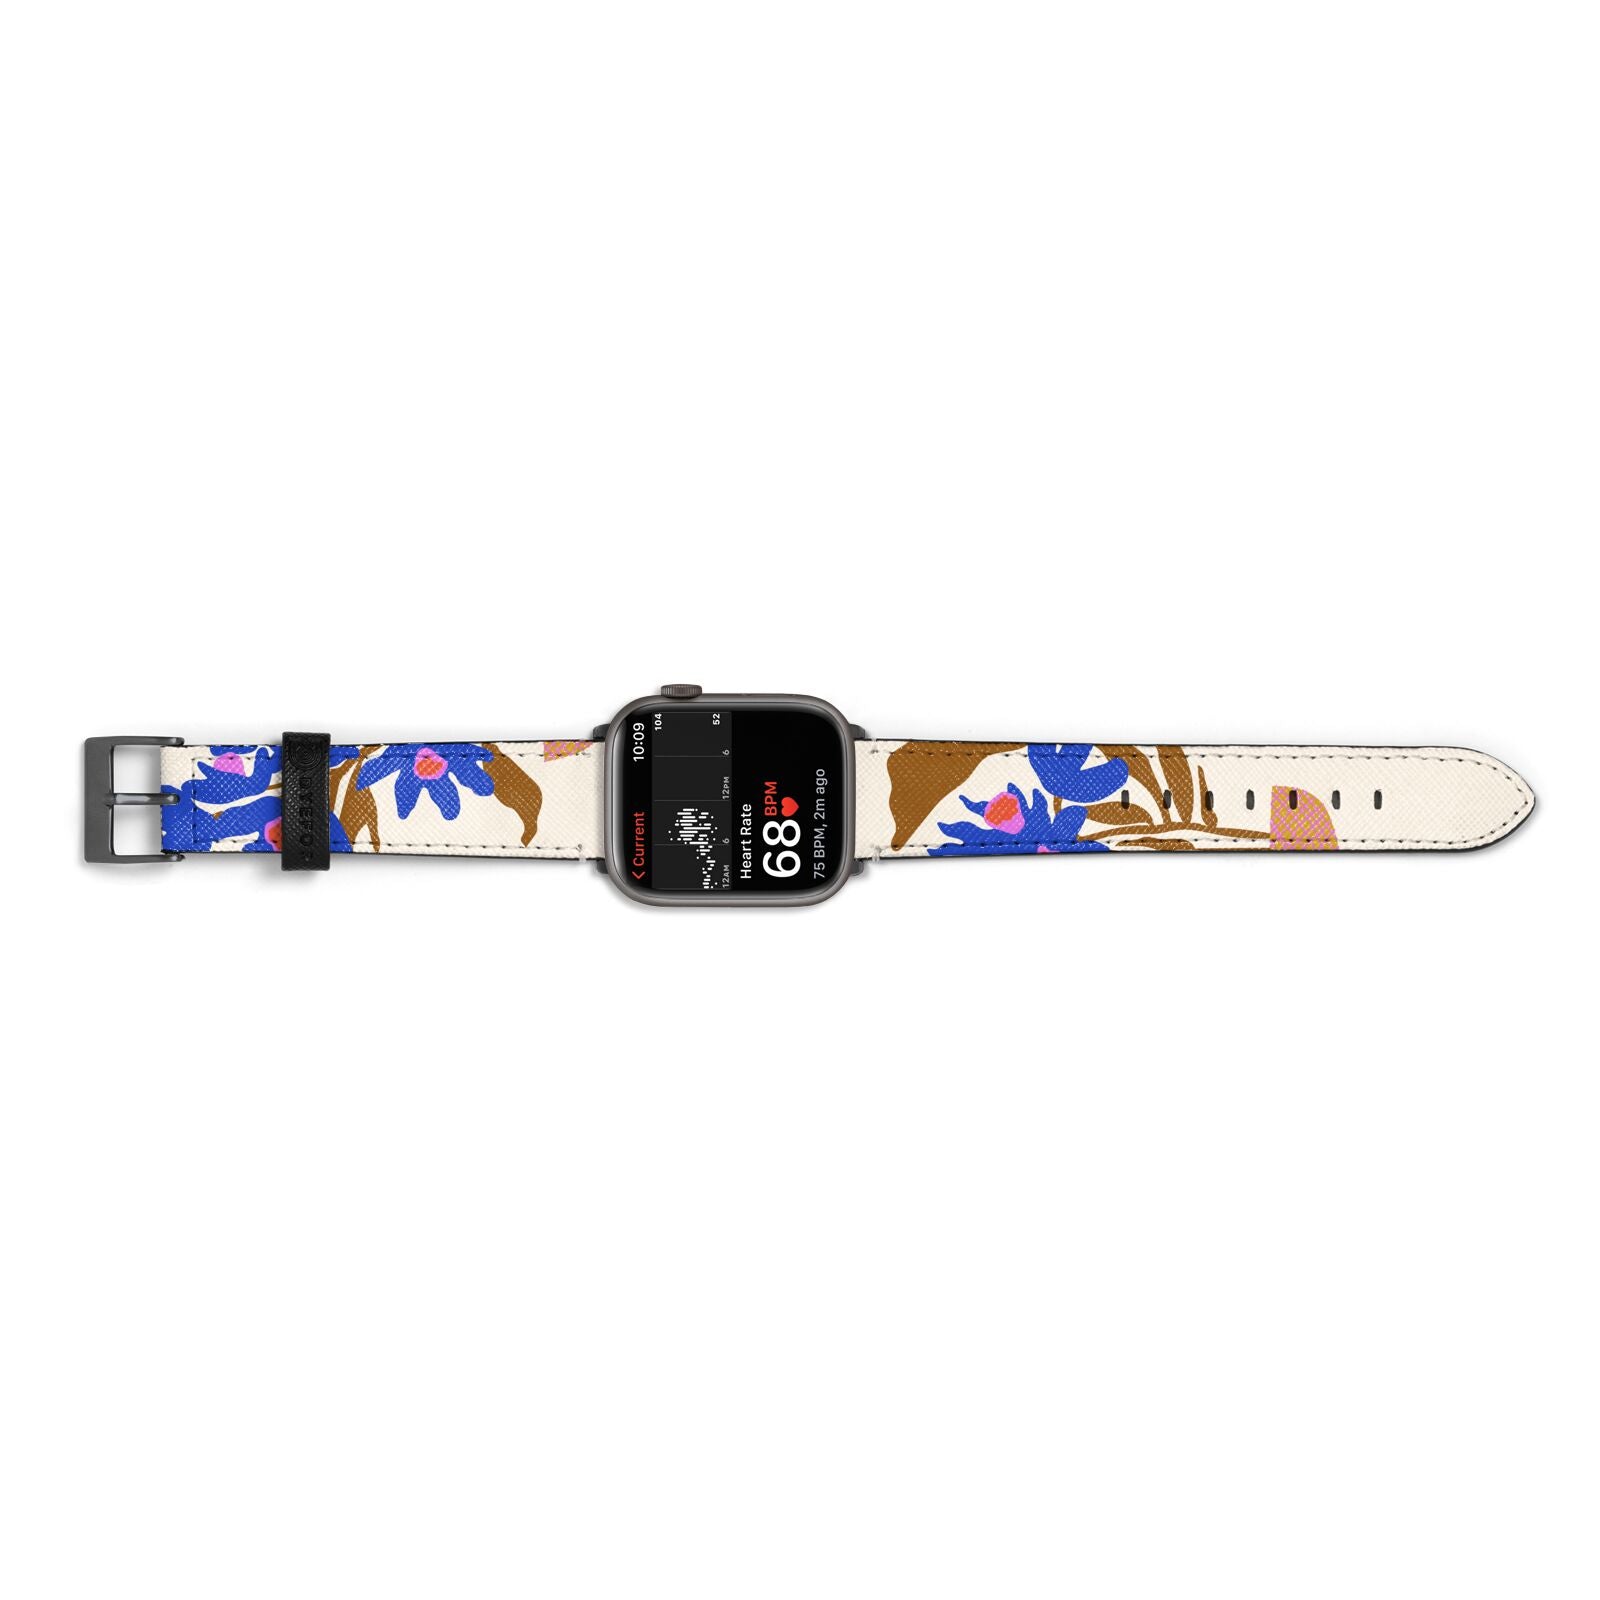 Flowers in a Vase Apple Watch Strap Size 38mm Landscape Image Space Grey Hardware